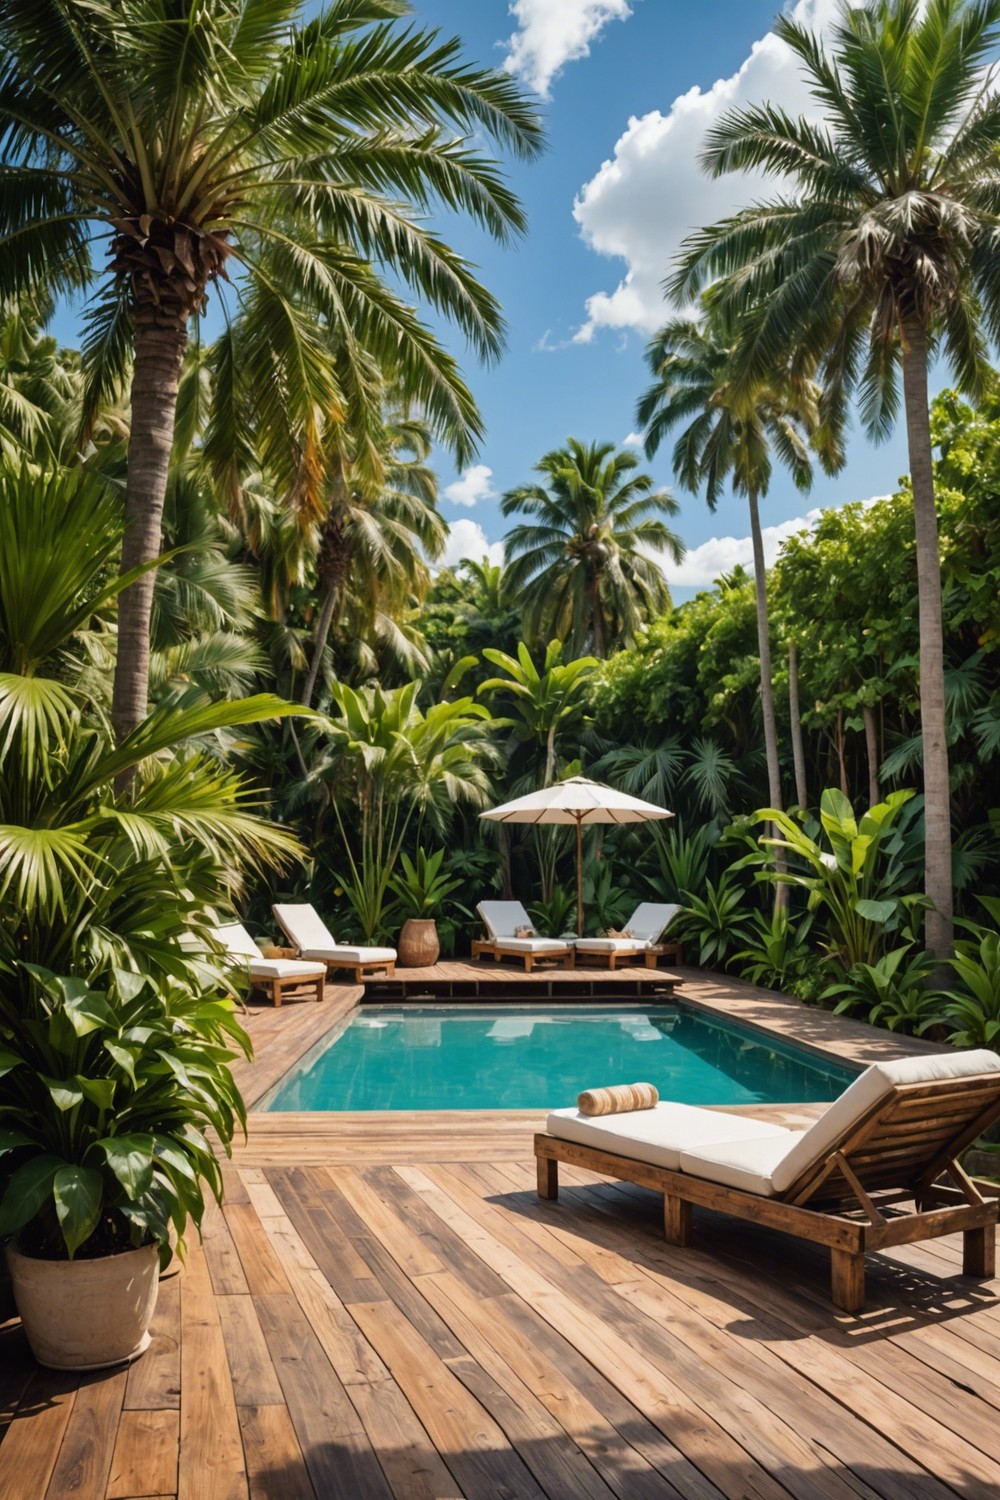 Tropical Pallet Pool Decks with Palm Trees